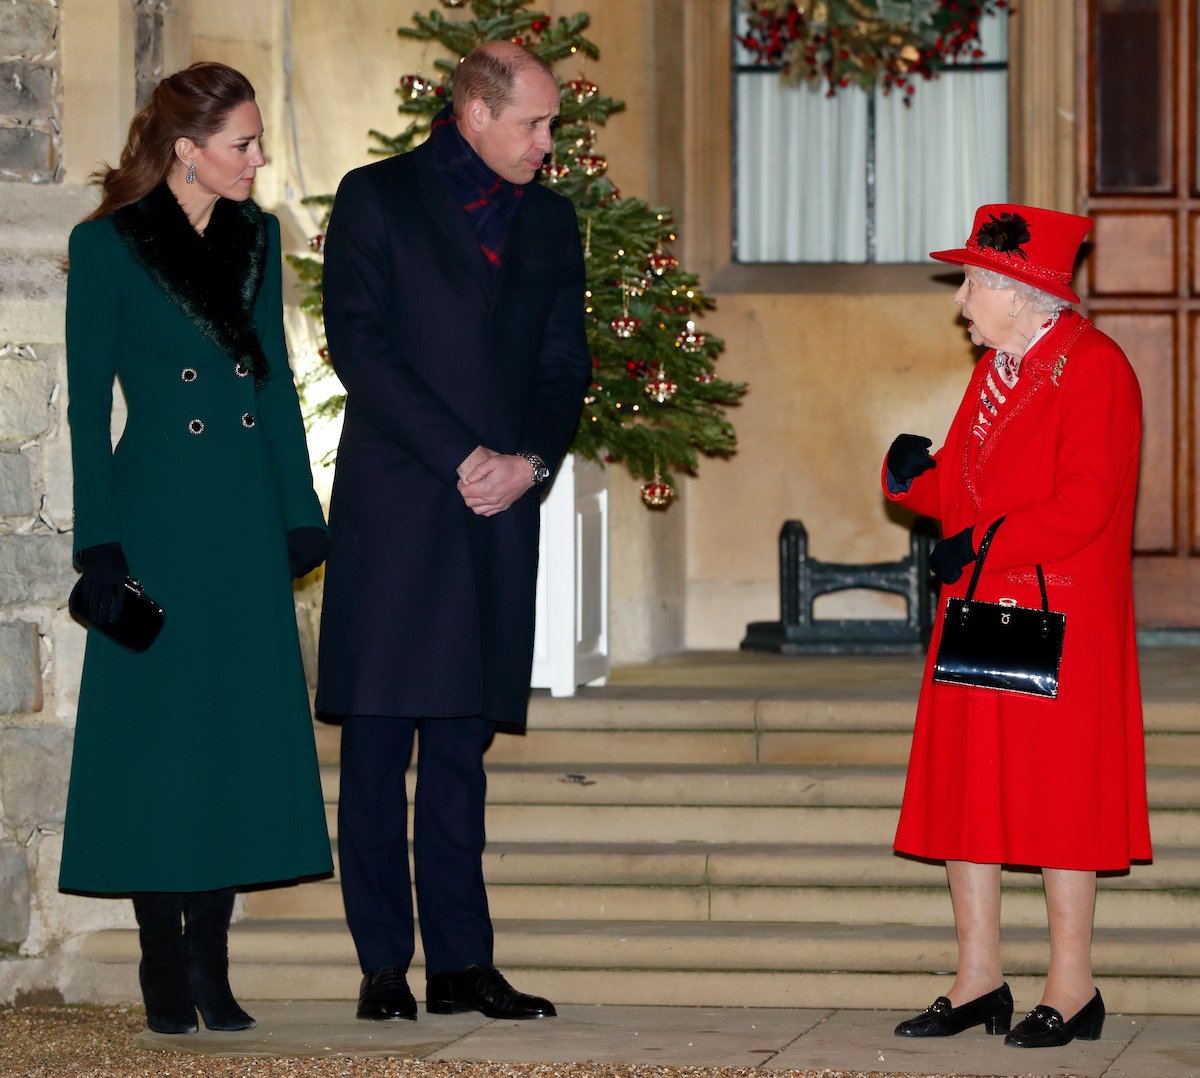 Kate Middleton, whose 2022 Christmas carol concert invitation has a small nod to Queen Elizabeth II, corgis, stands next to Prince William and Queen Elizabeth II in 2020